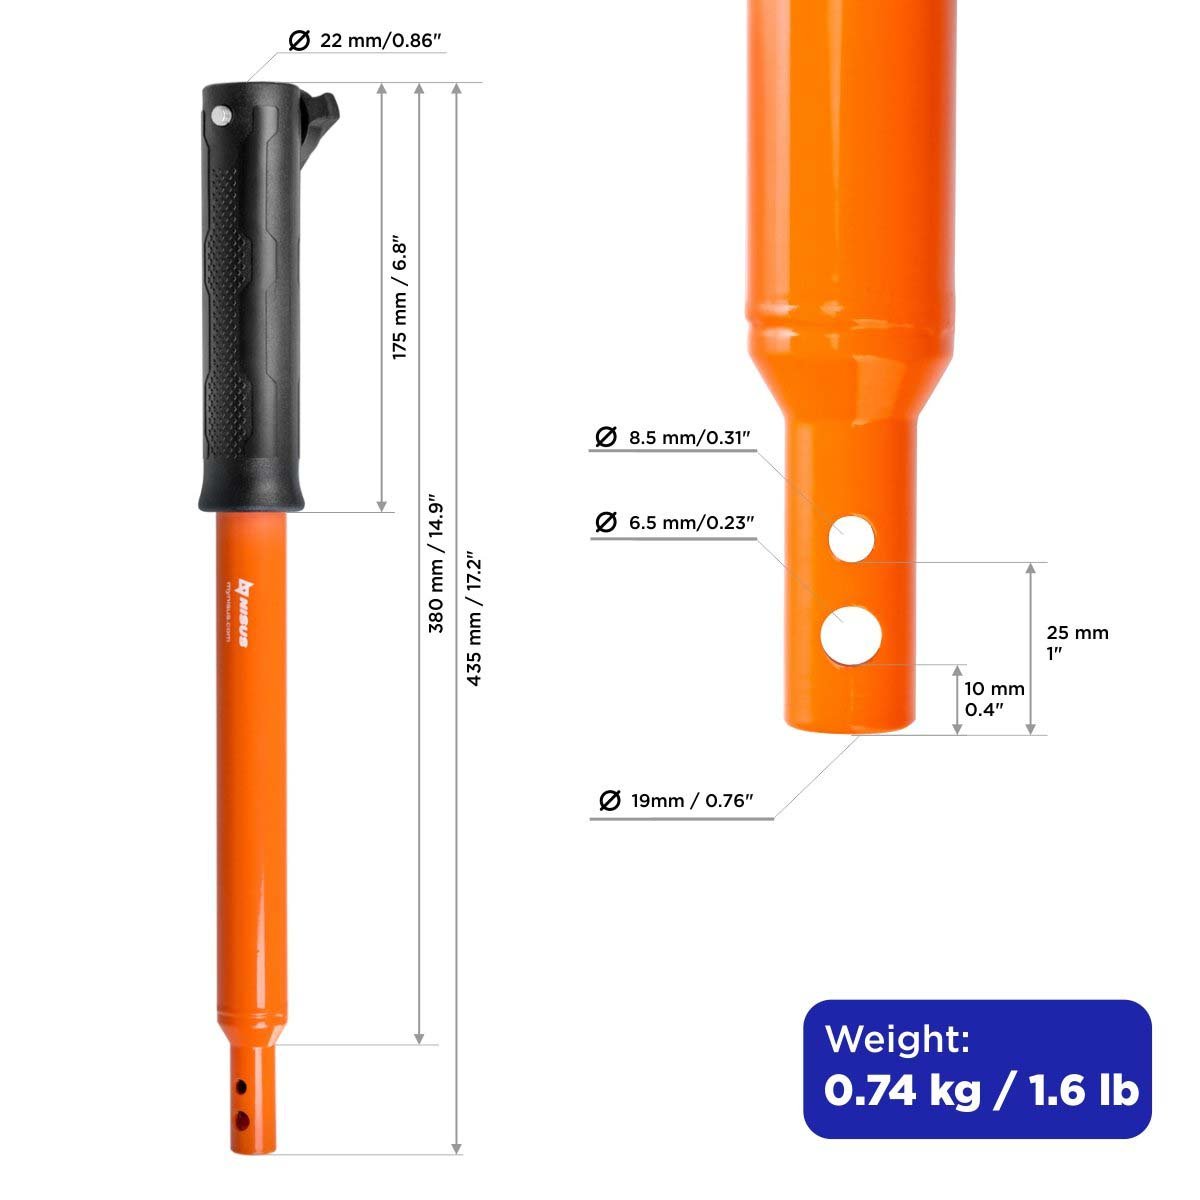 Motoshtorm Power Auger Drill Bit Extension is up to 18 Inches long and weighs 1.6 lbs